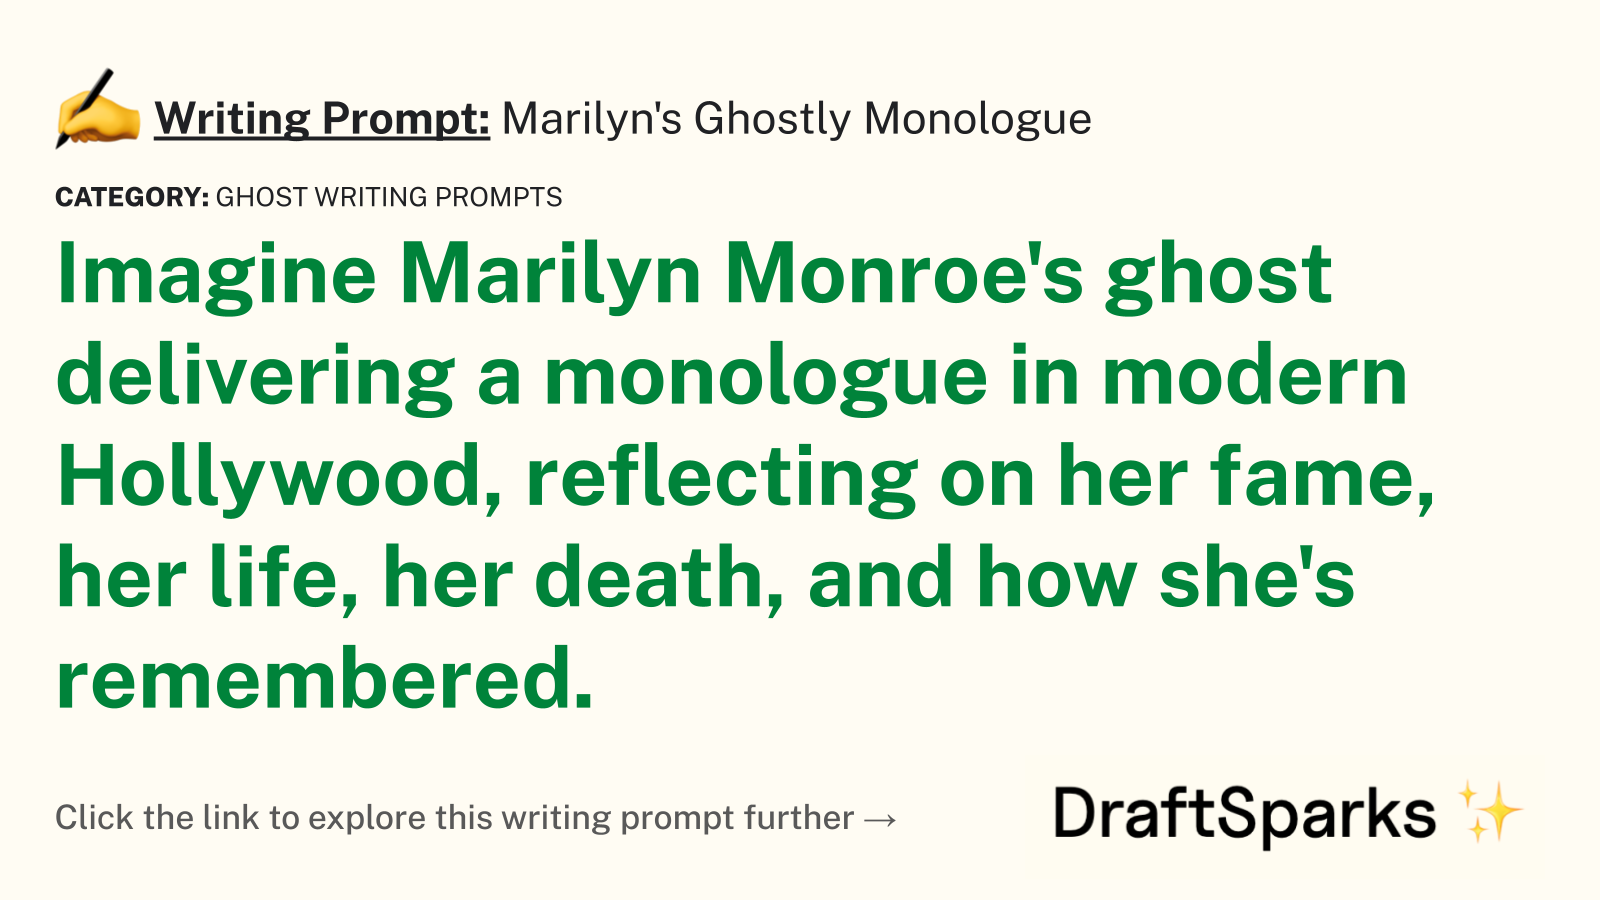 Marilyn’s Ghostly Monologue